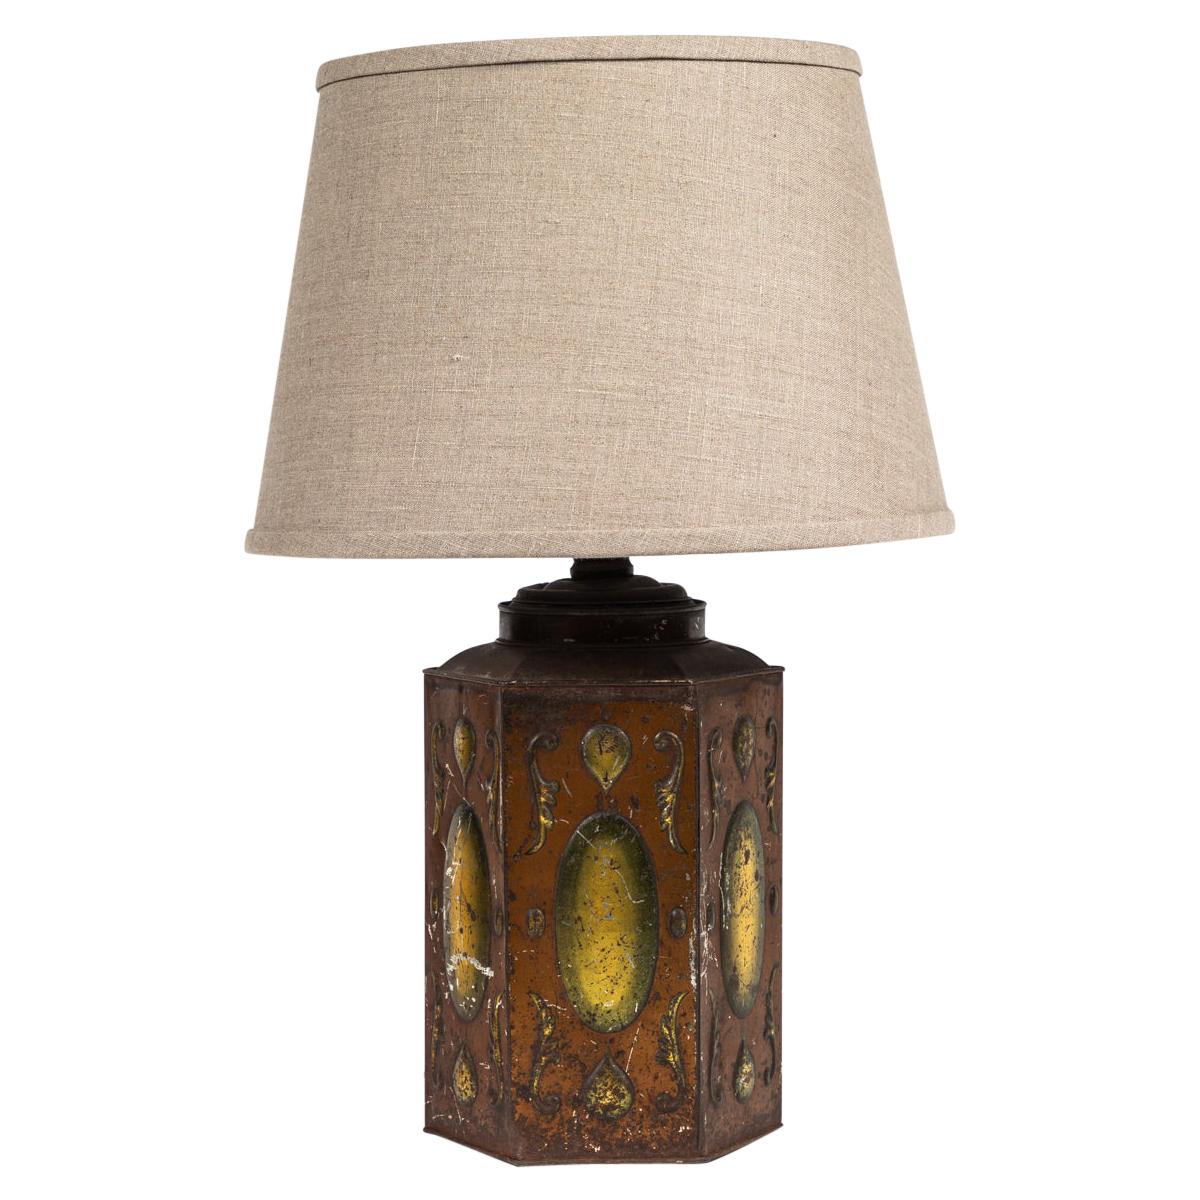 Late 19th Century Tole Decorated Tin Lamp with Custom Shade 